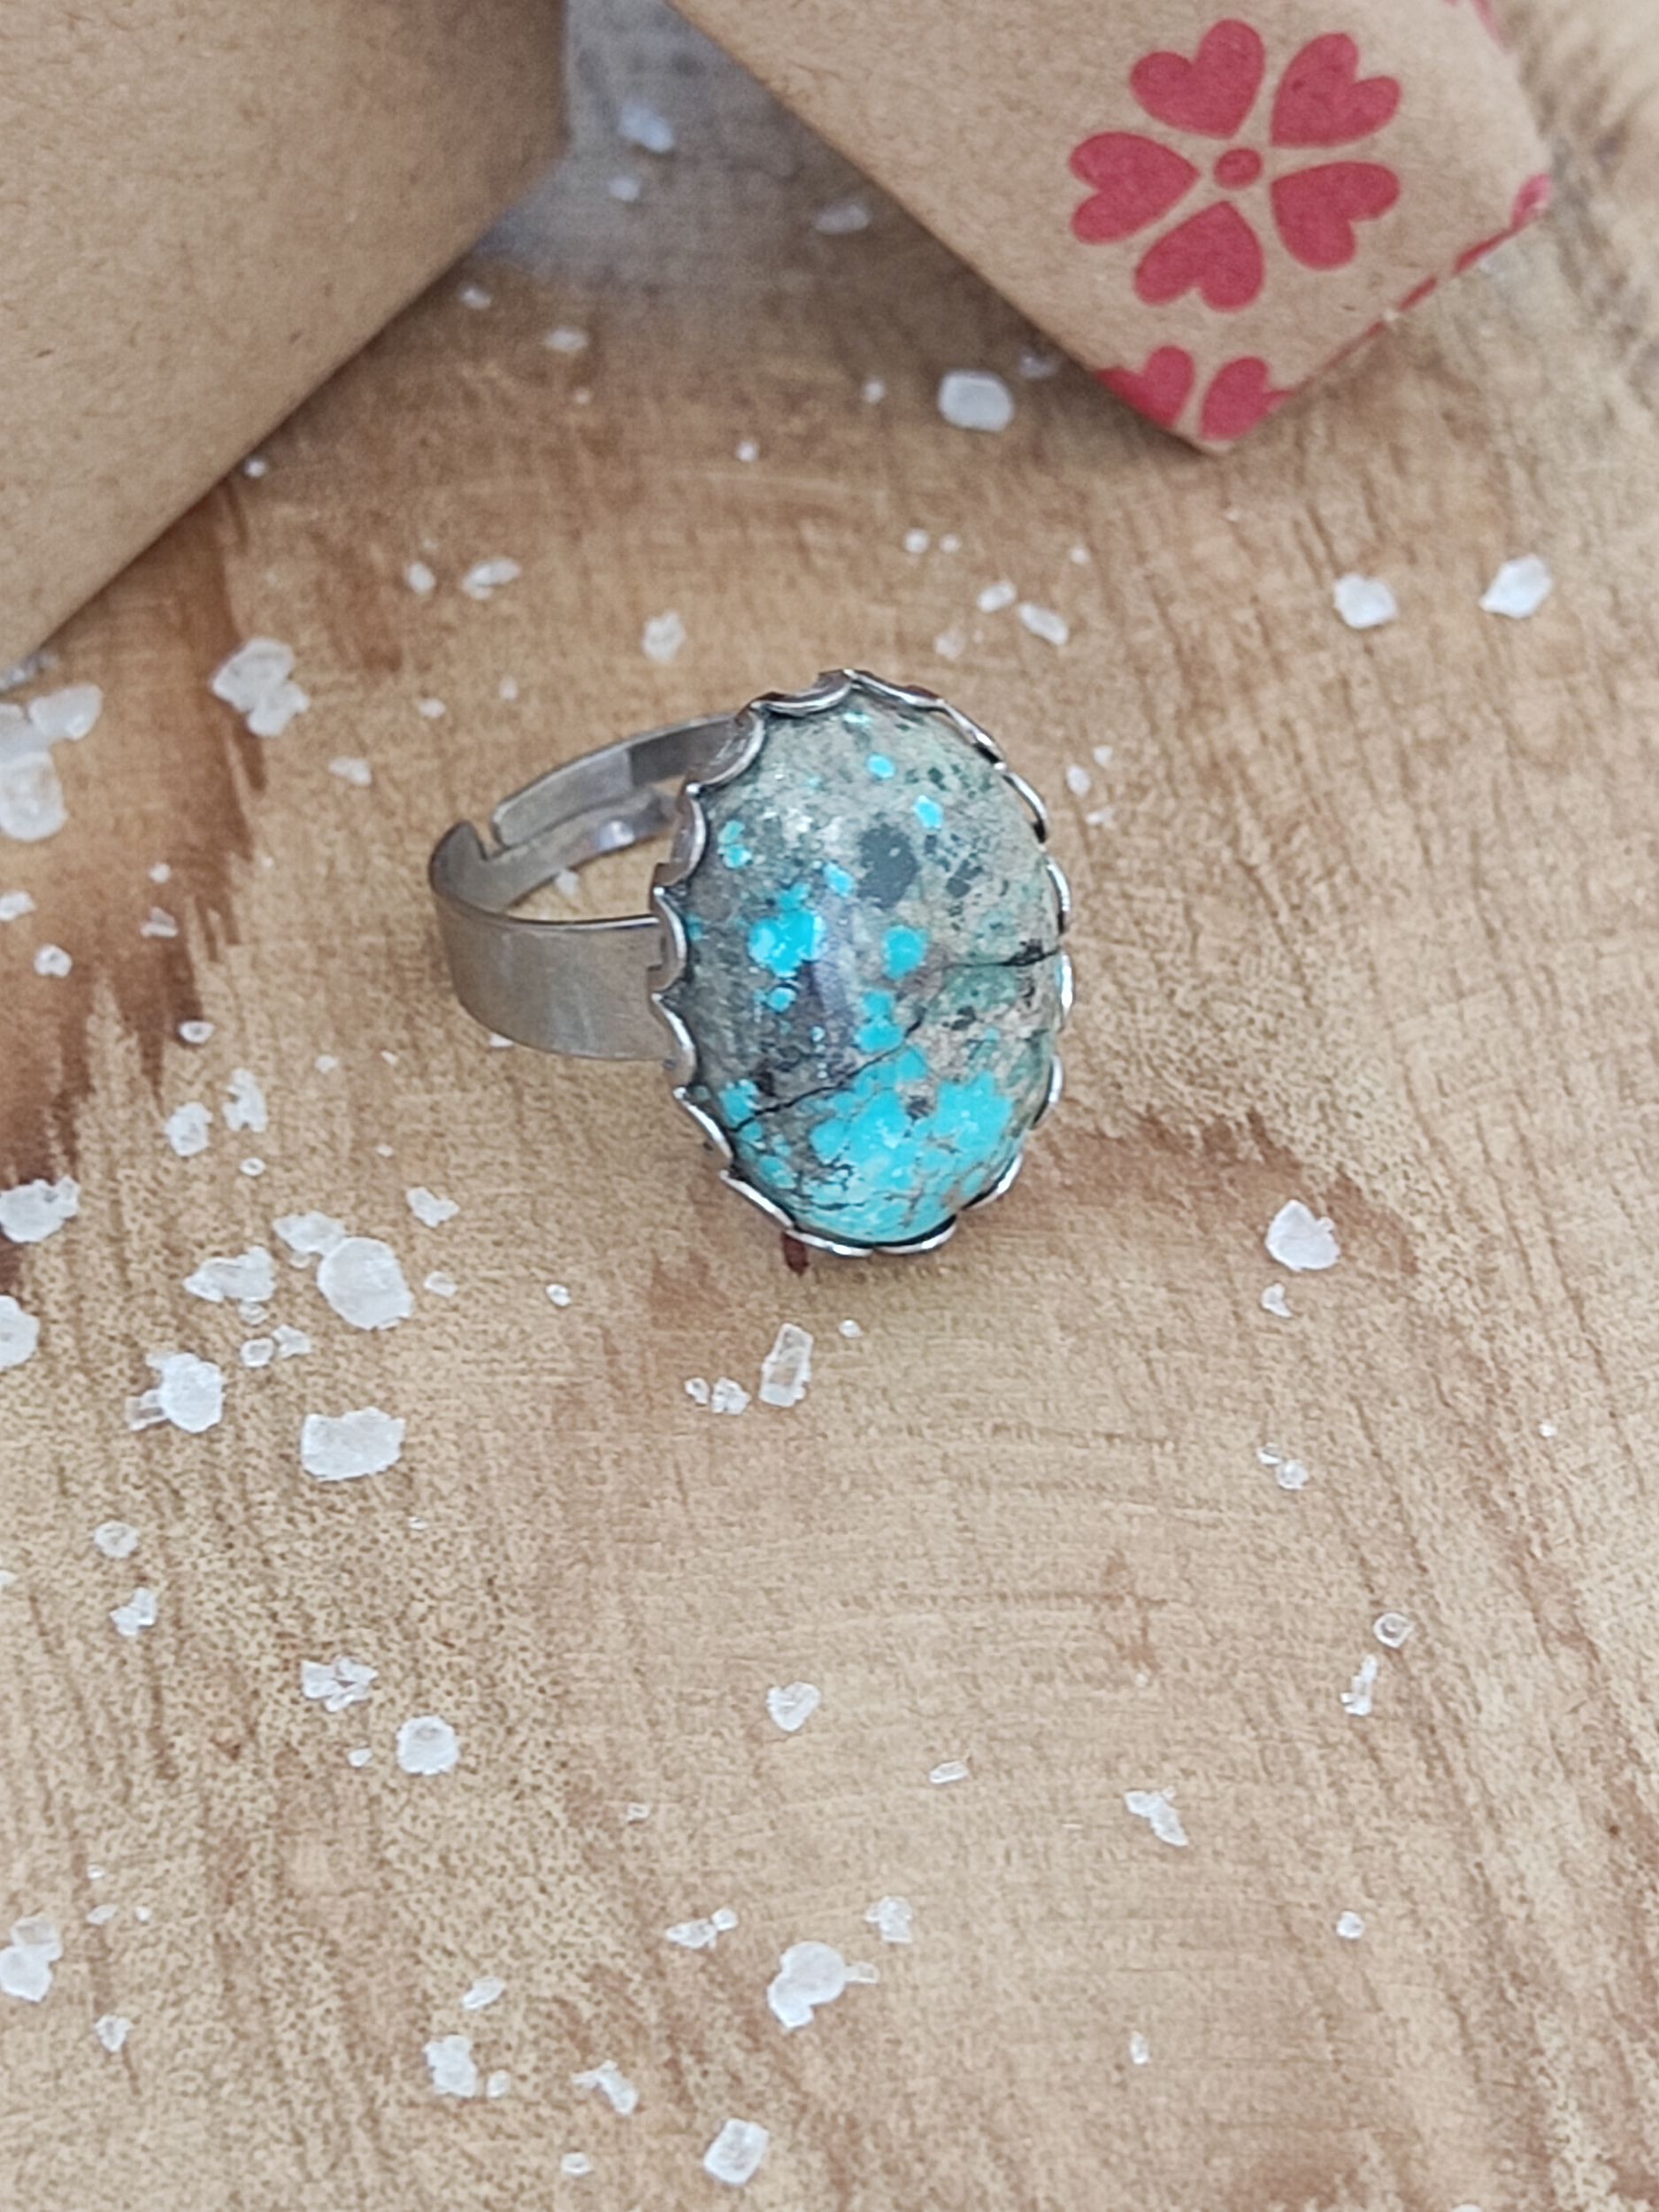 Bague 18x13 Turquoise 3